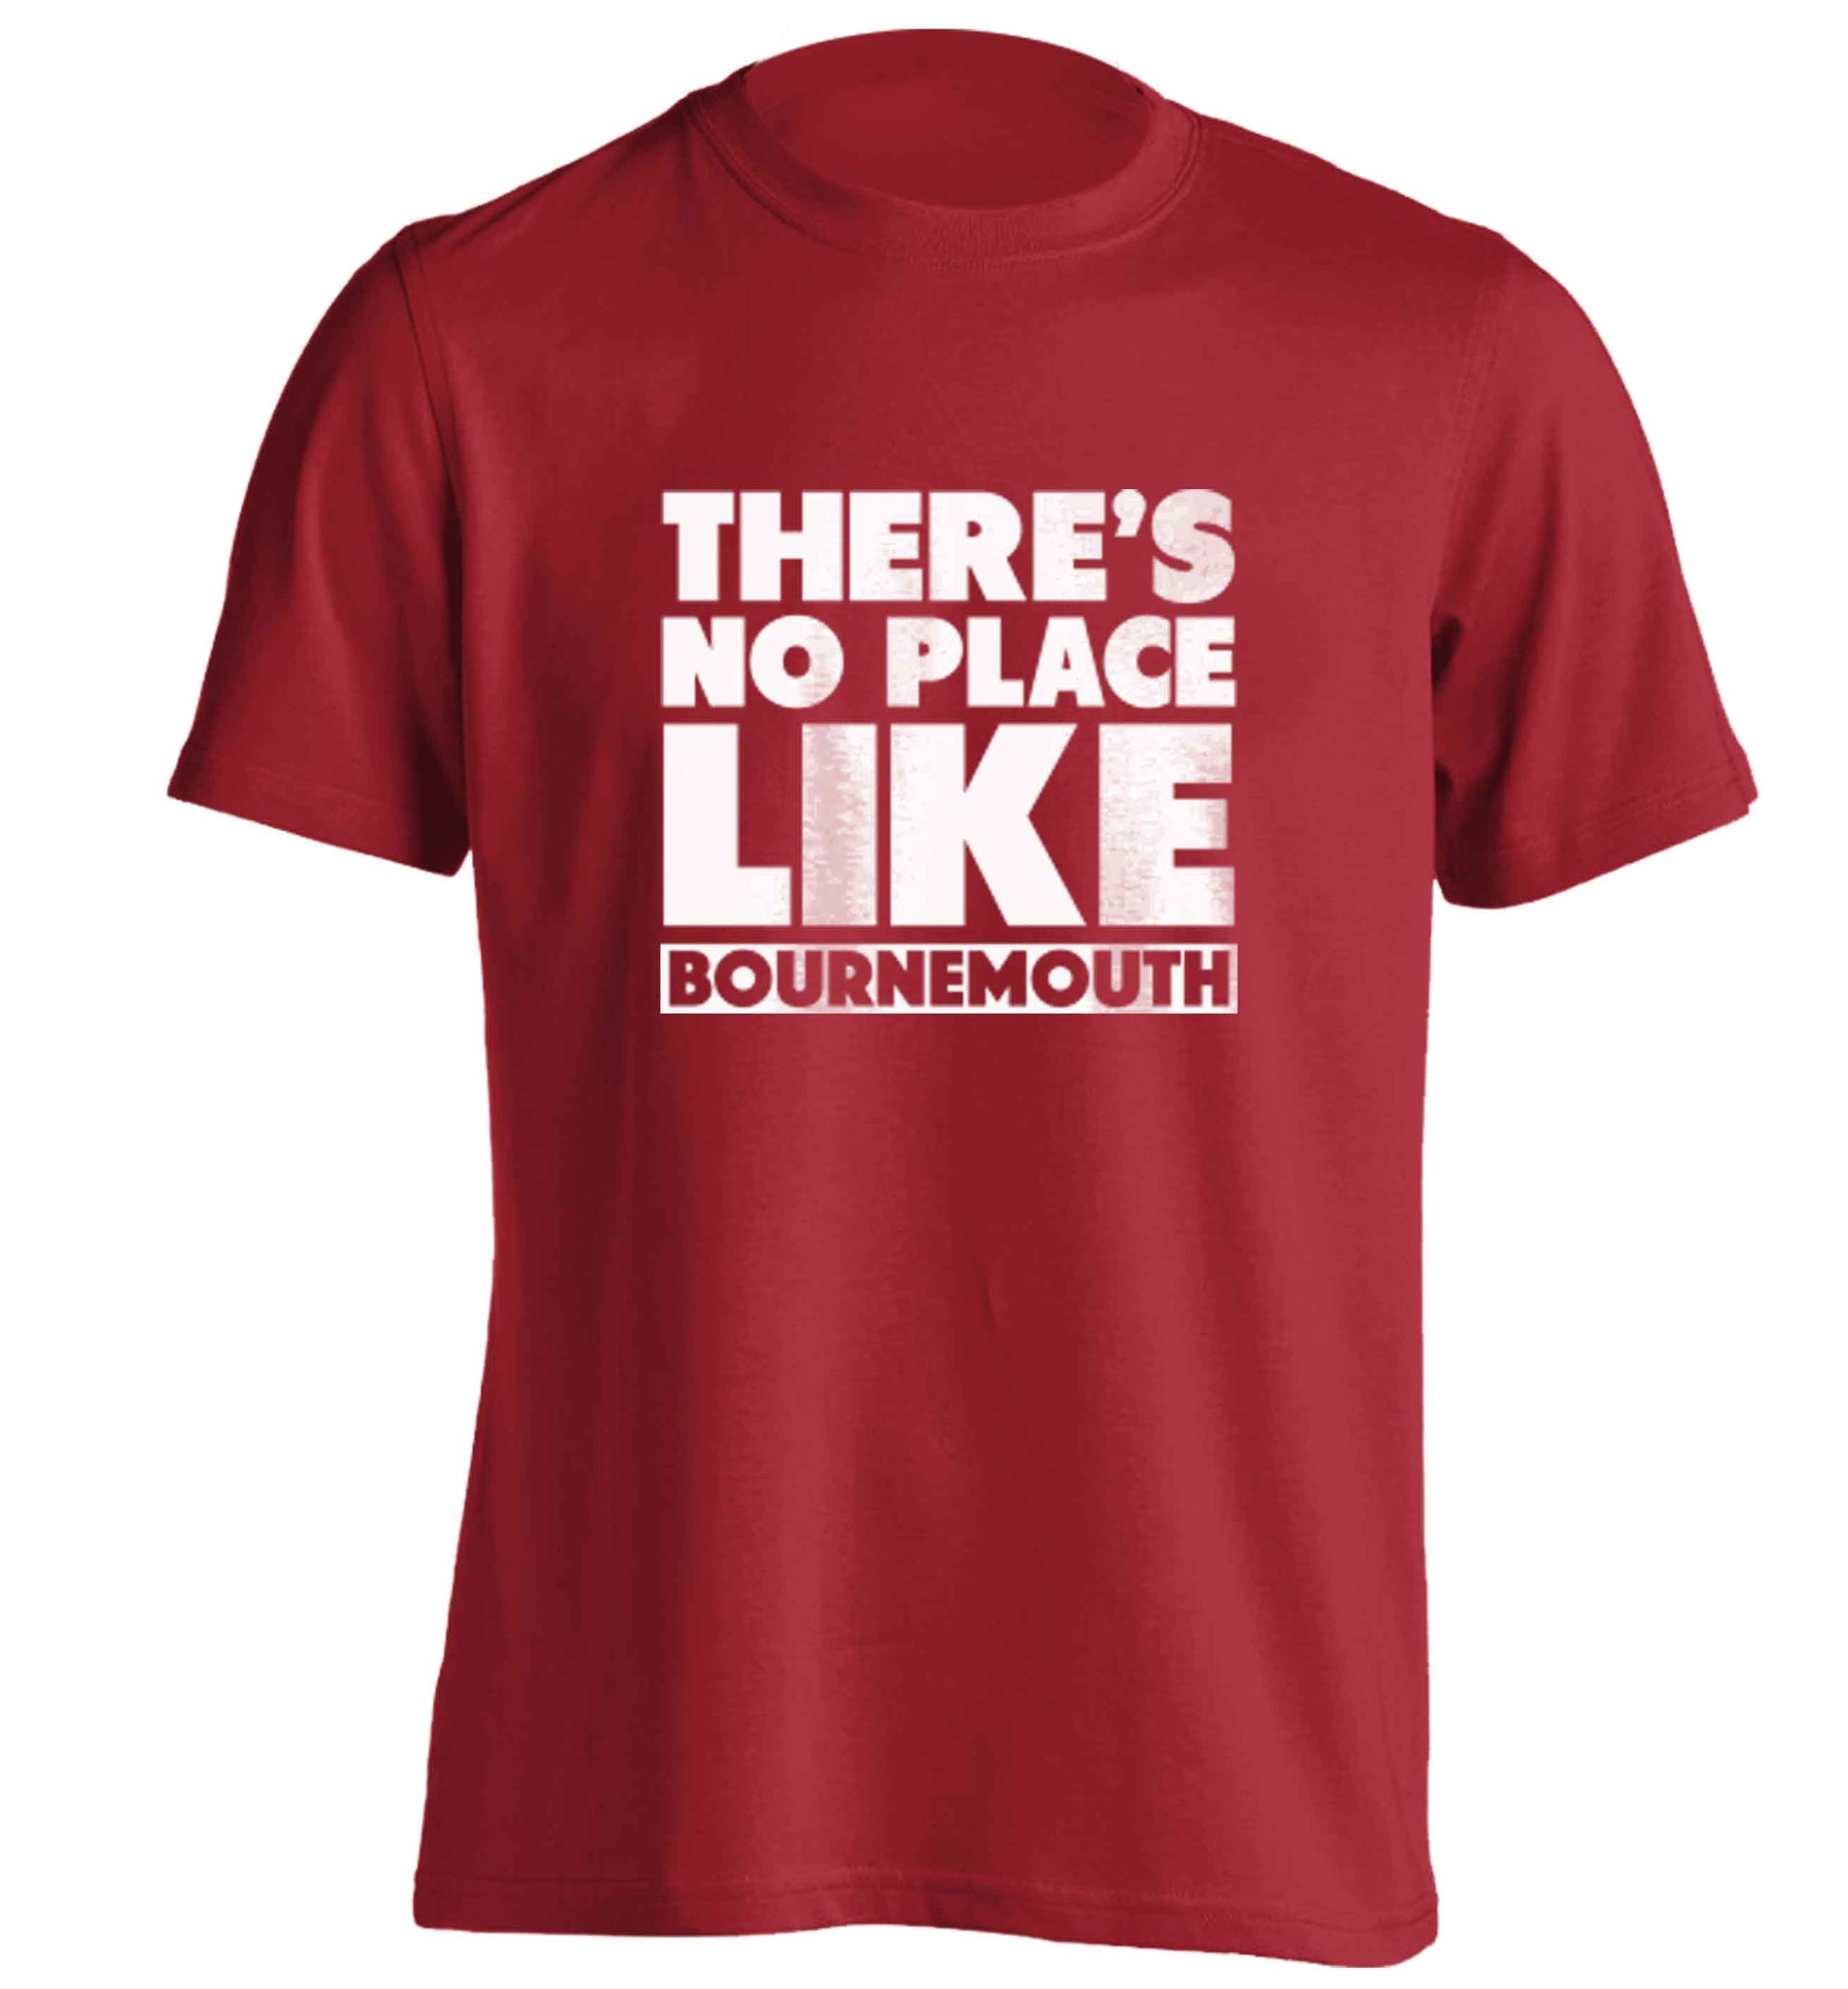 There's no place like Bournemouth adults unisex red Tshirt 2XL